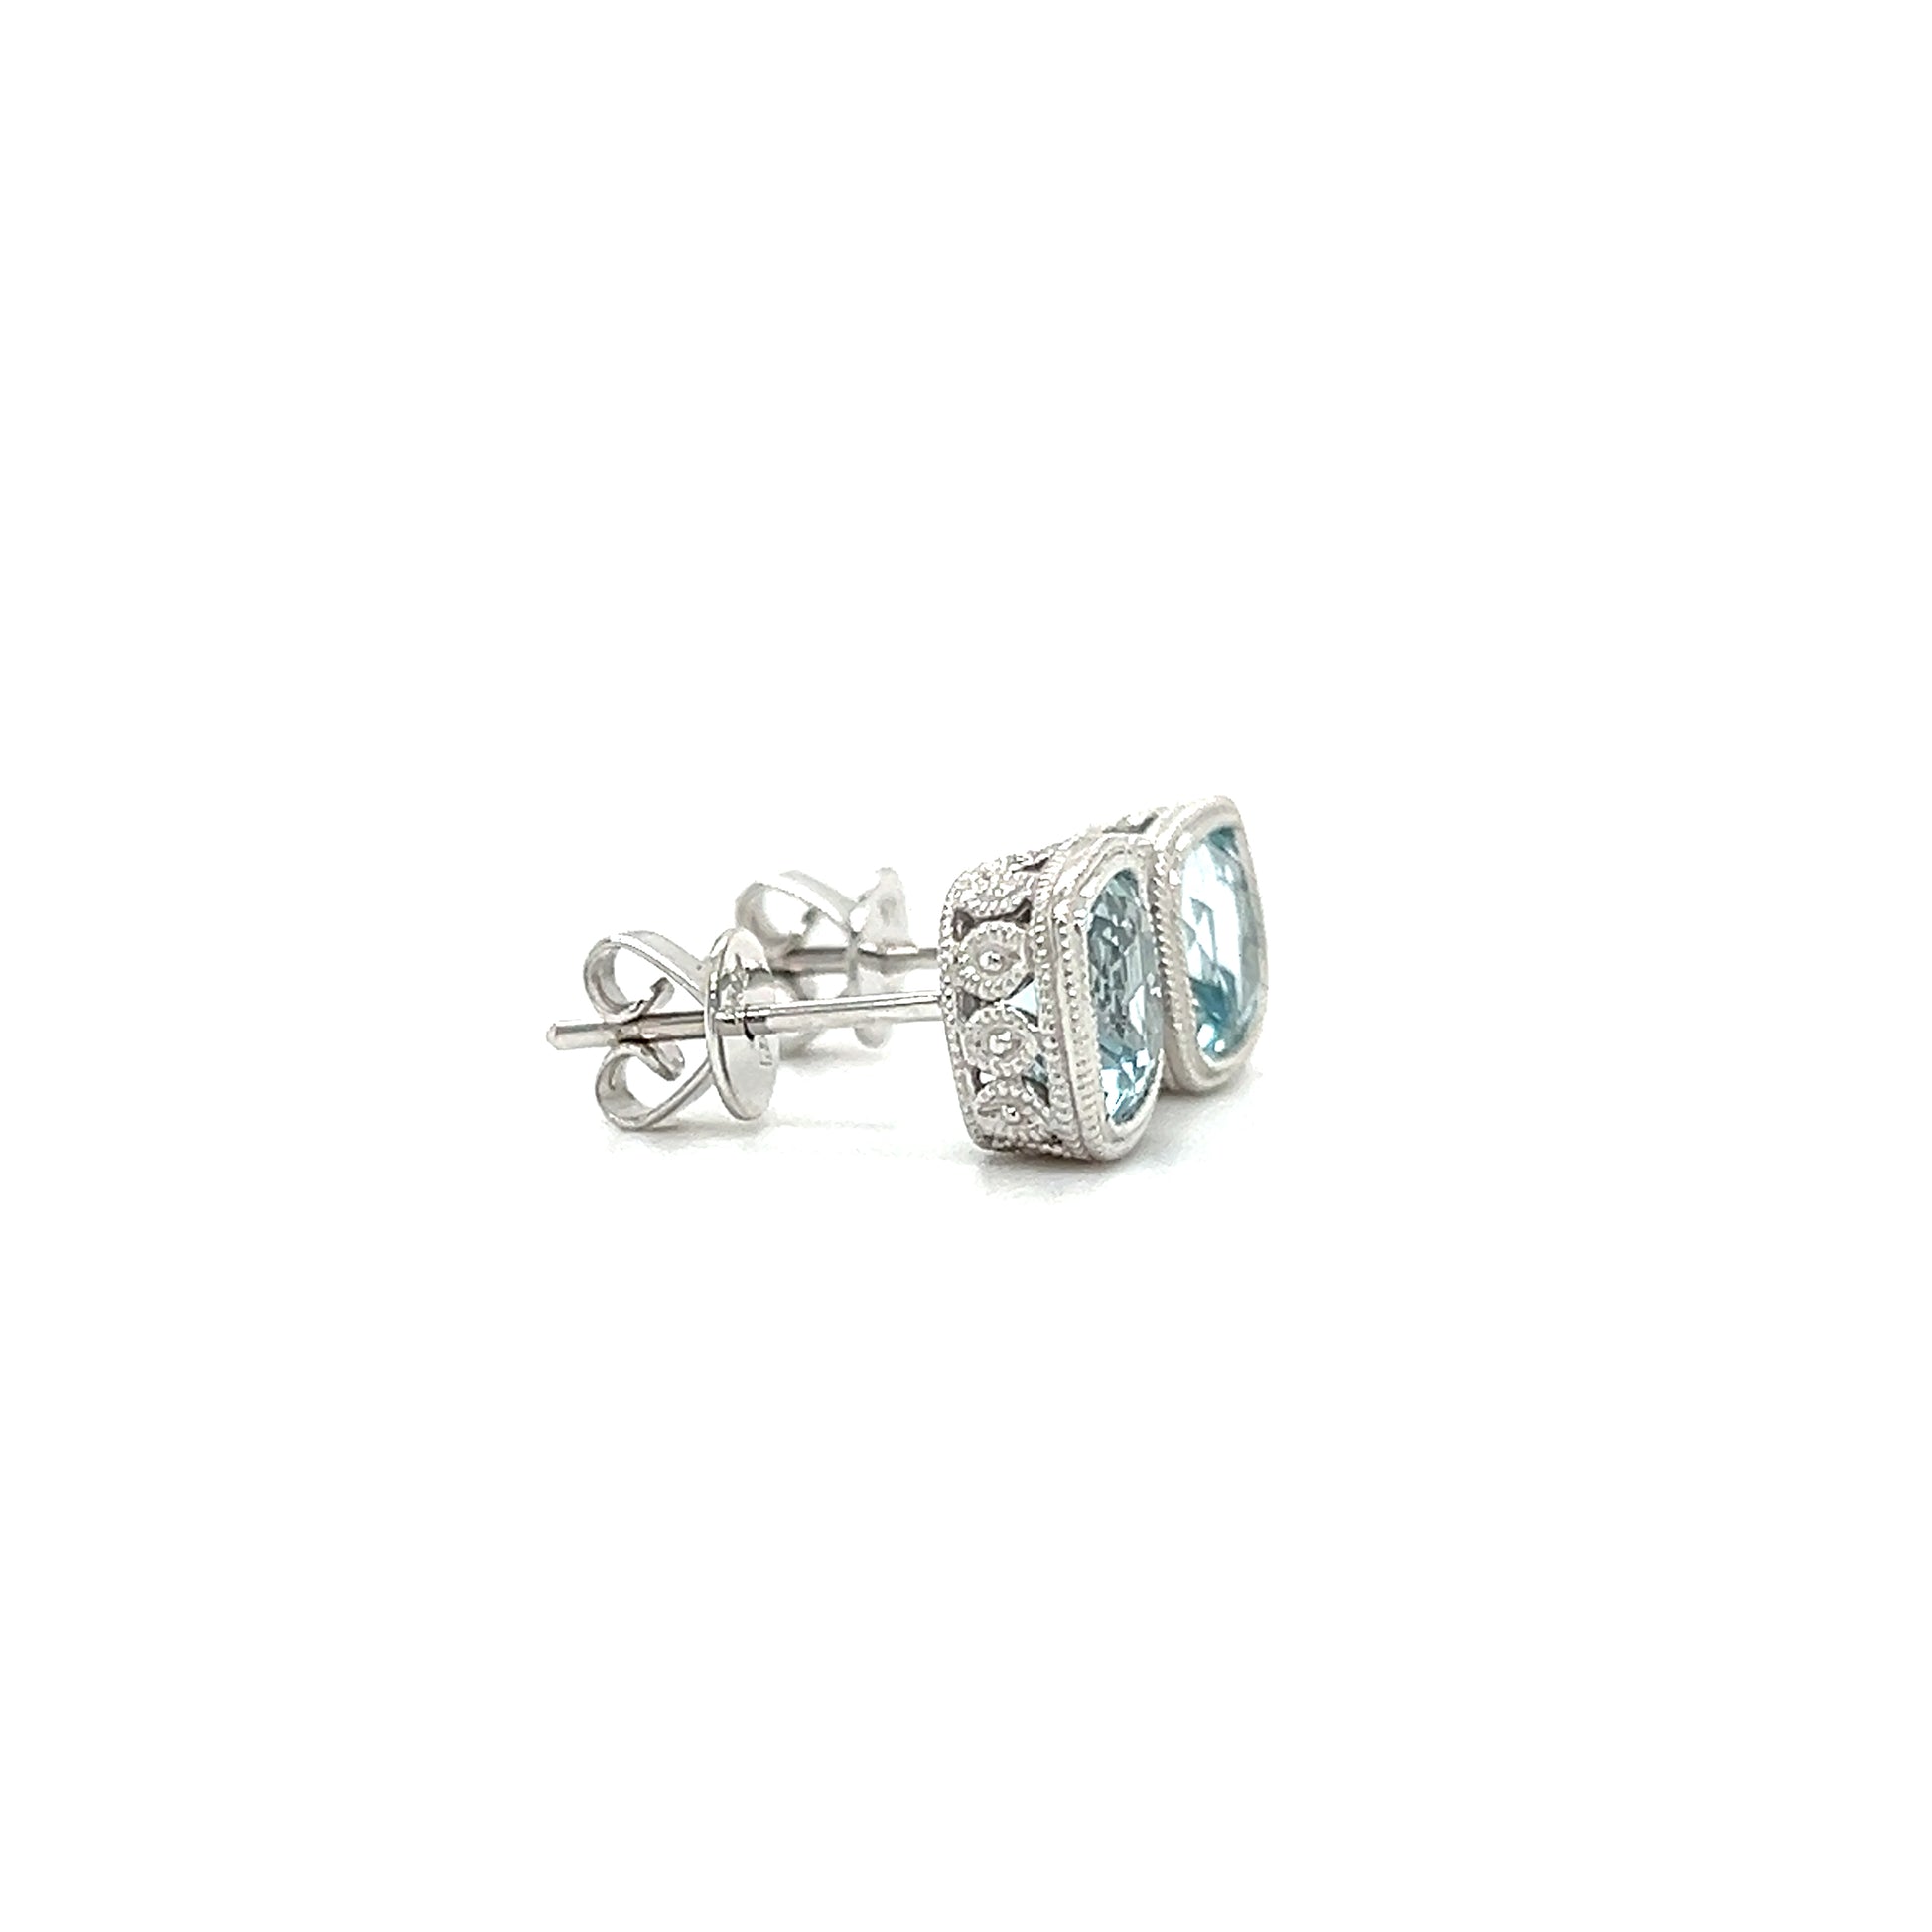 Aquamarine Stud Earrings with Milgrain and Filigree Details in 14K White Gold Left Side View